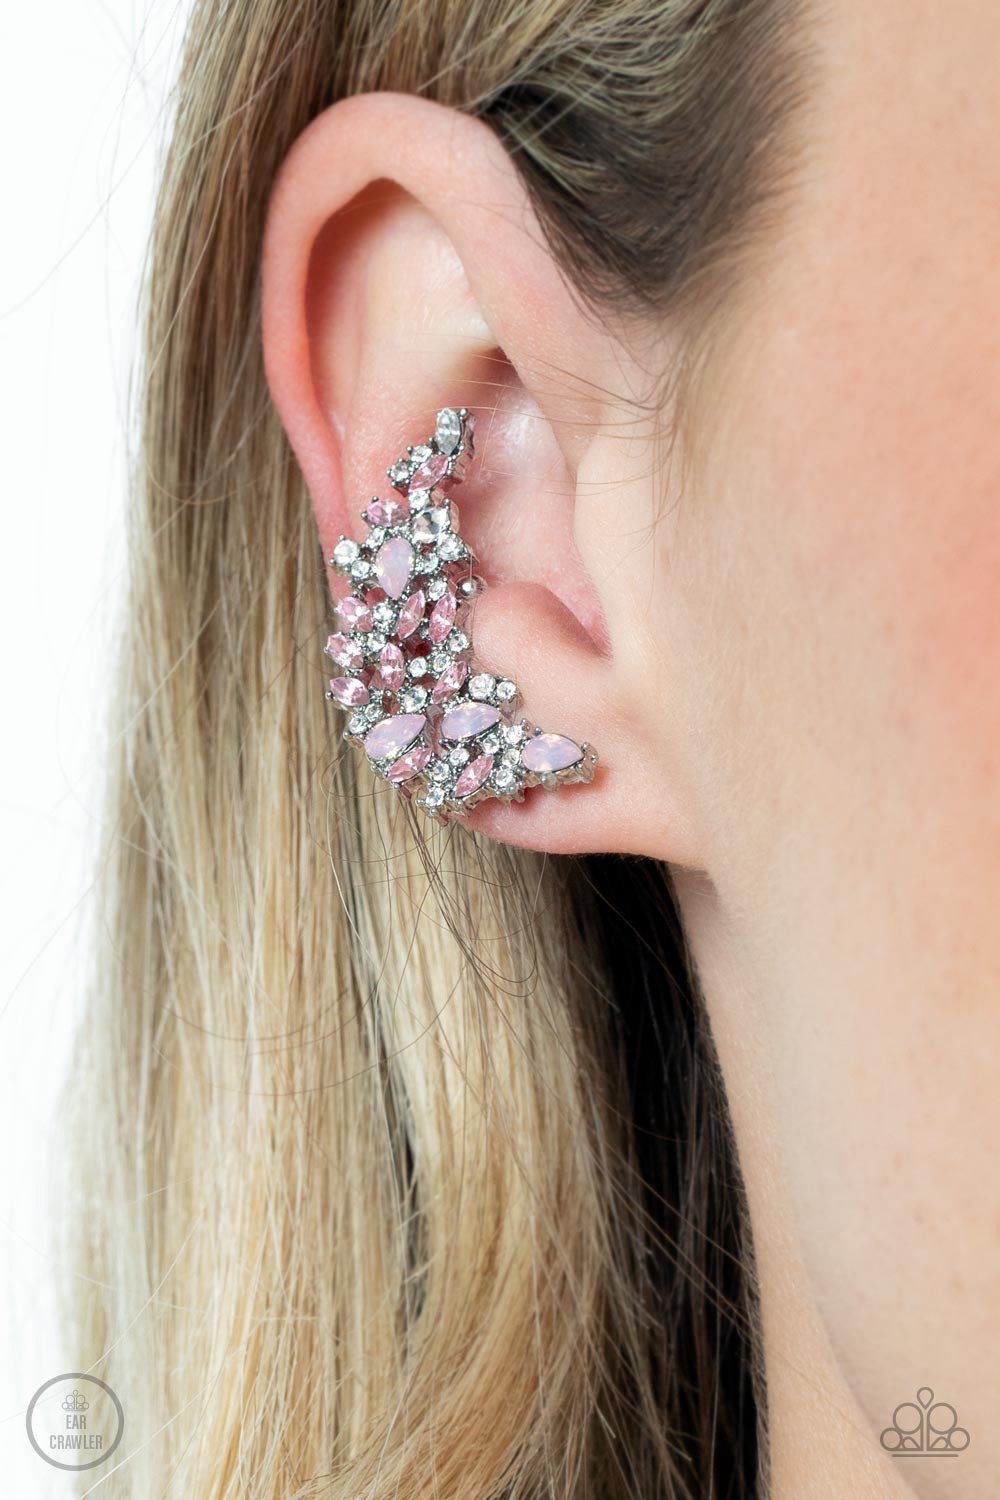 Prismatically Panoramic Pink Ear Crawler Earring - Paparazzi Accessories  Varying in round, marquise, and teardrop cuts, a glittery explosion of pink, white, and opal pink rhinestones coalesces into panoramic sparkle. Features a dainty cuff attached to the top for a secure fit.  Sold as one pair of ear crawlers.